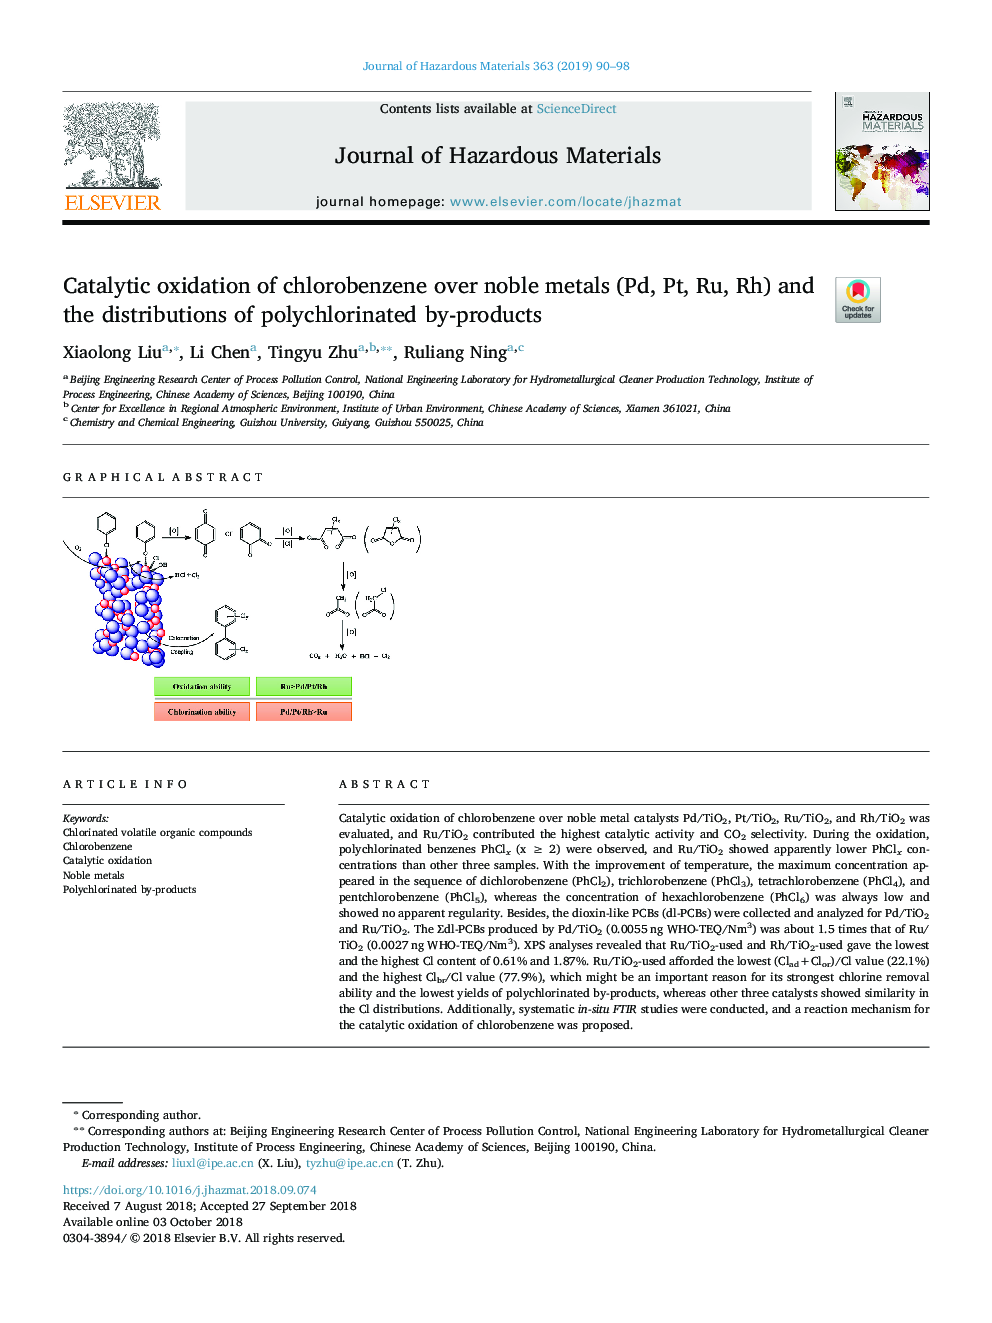 Catalytic oxidation of chlorobenzene over noble metals (Pd, Pt, Ru, Rh) and the distributions of polychlorinated by-products